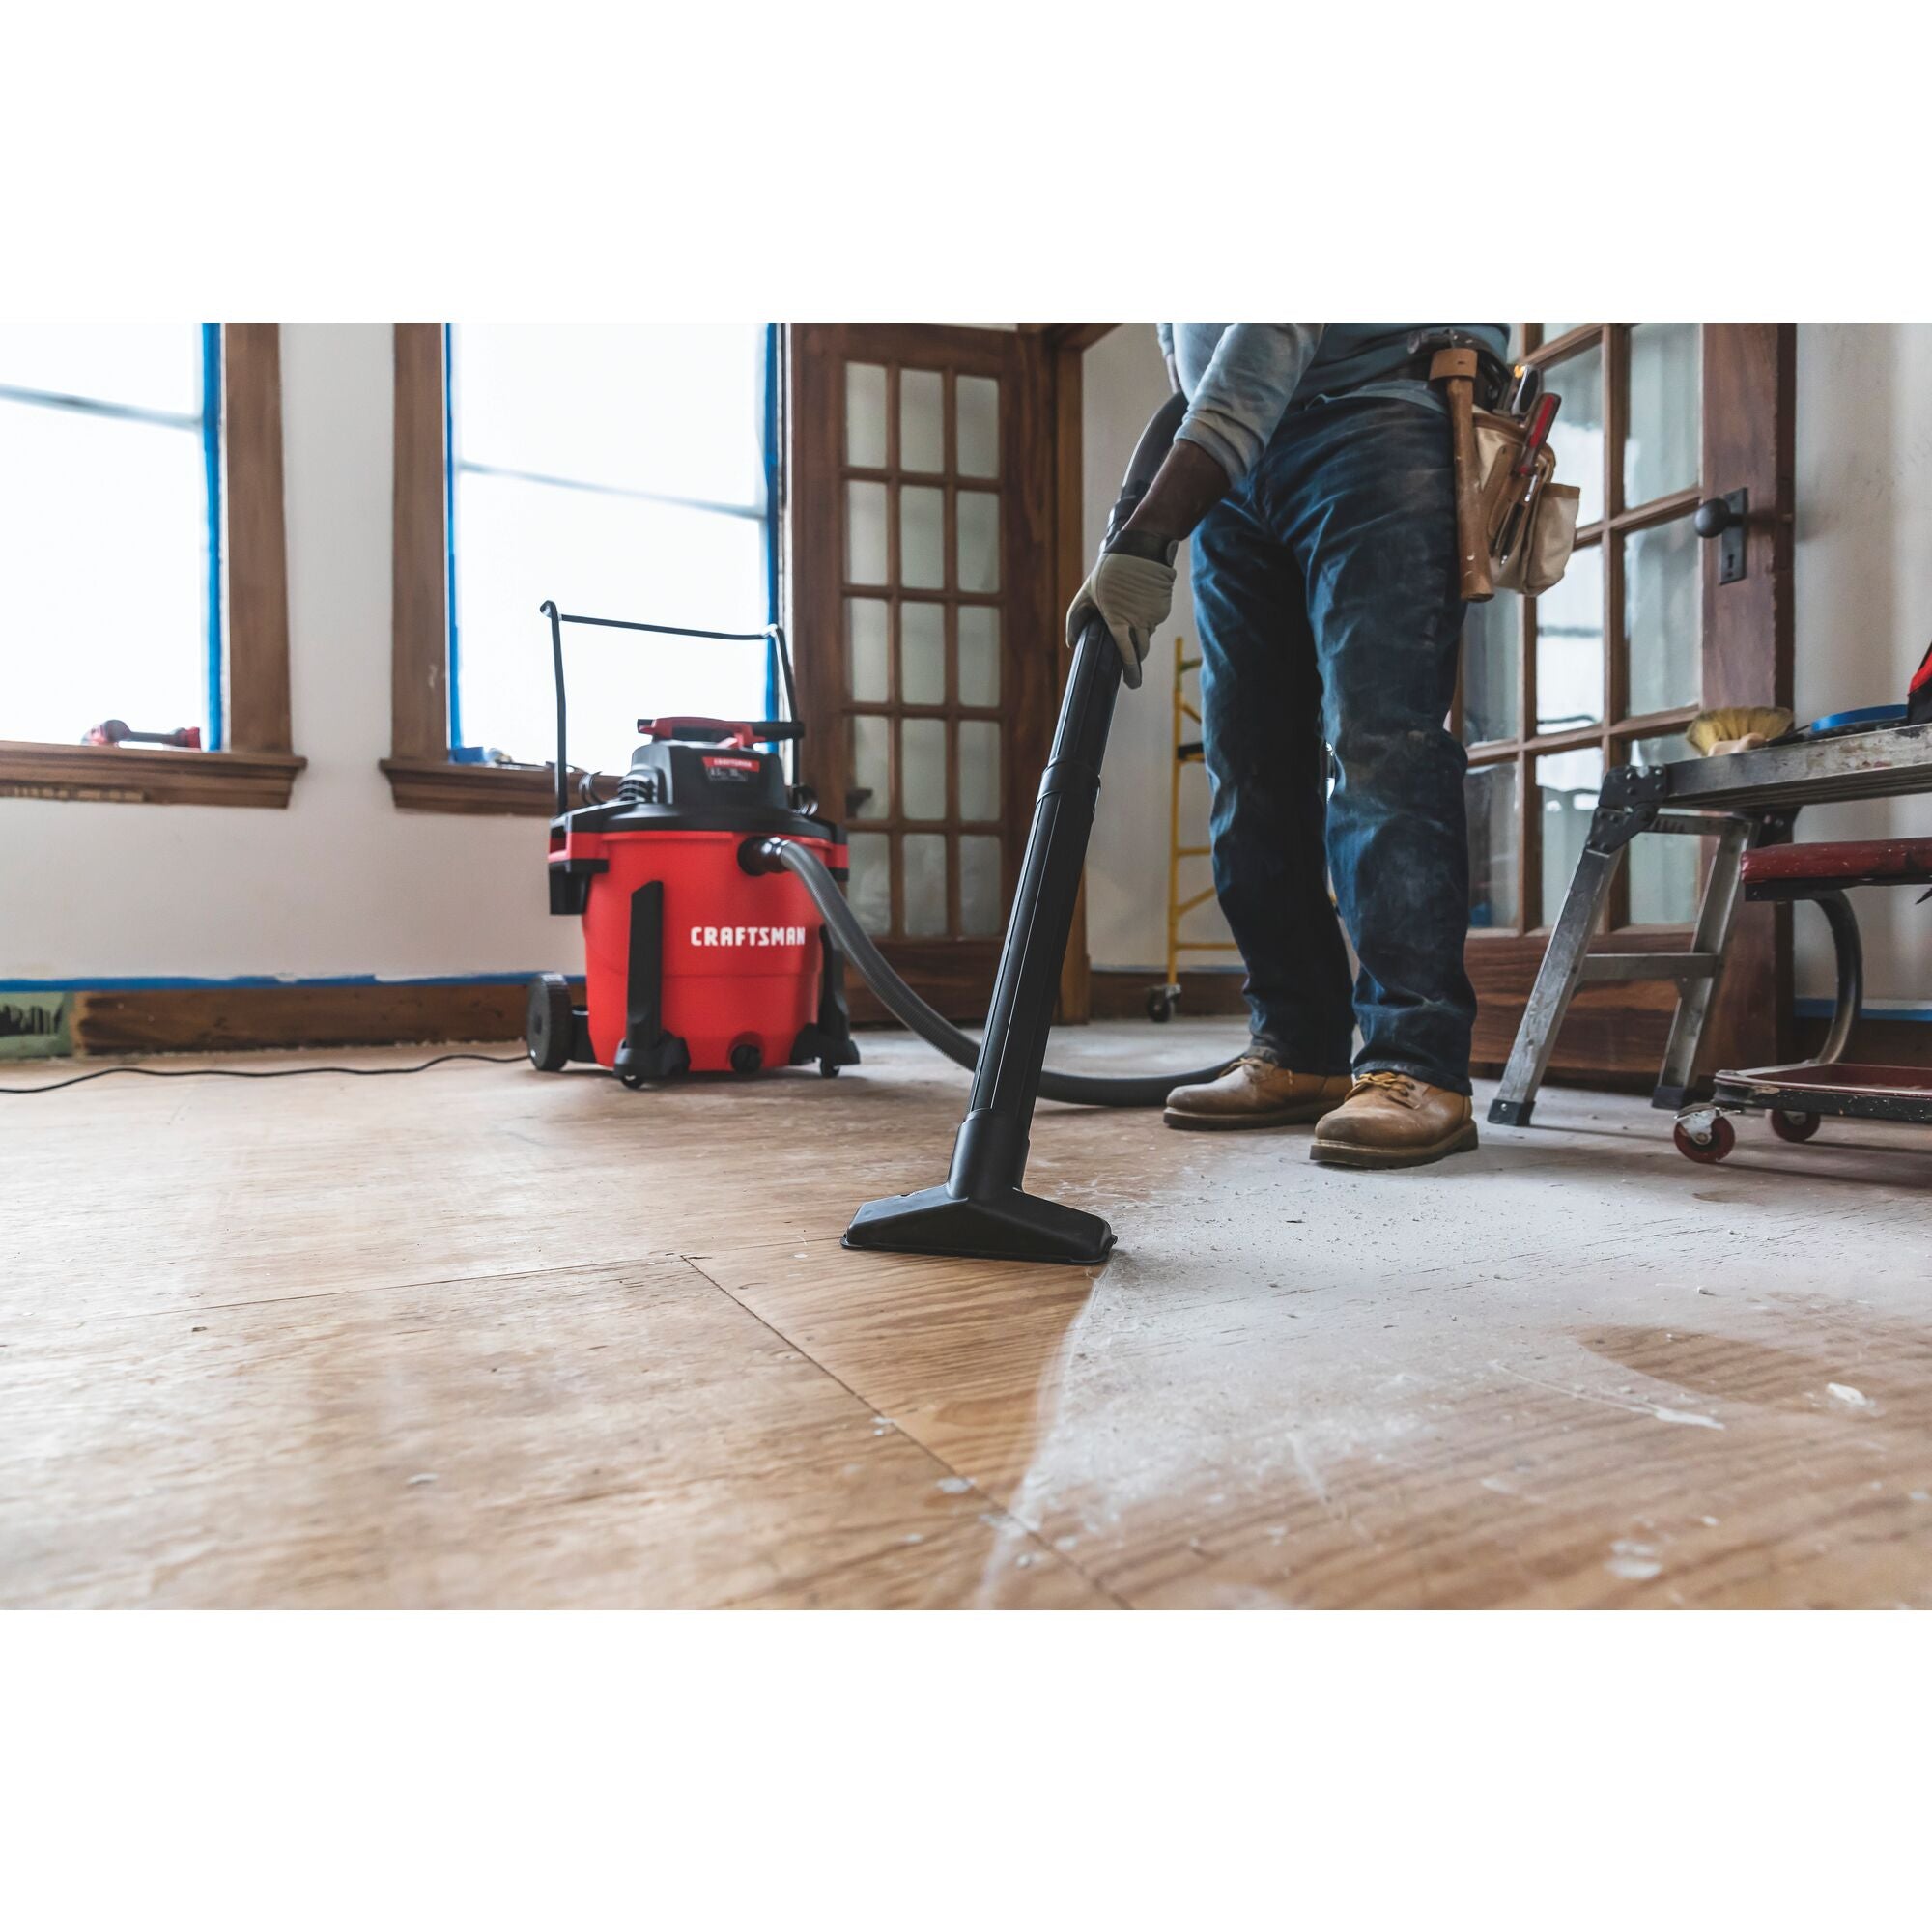 20 gallon 6.5 H P wet dry vacuum with cart being used by a person to clean wooden floor.